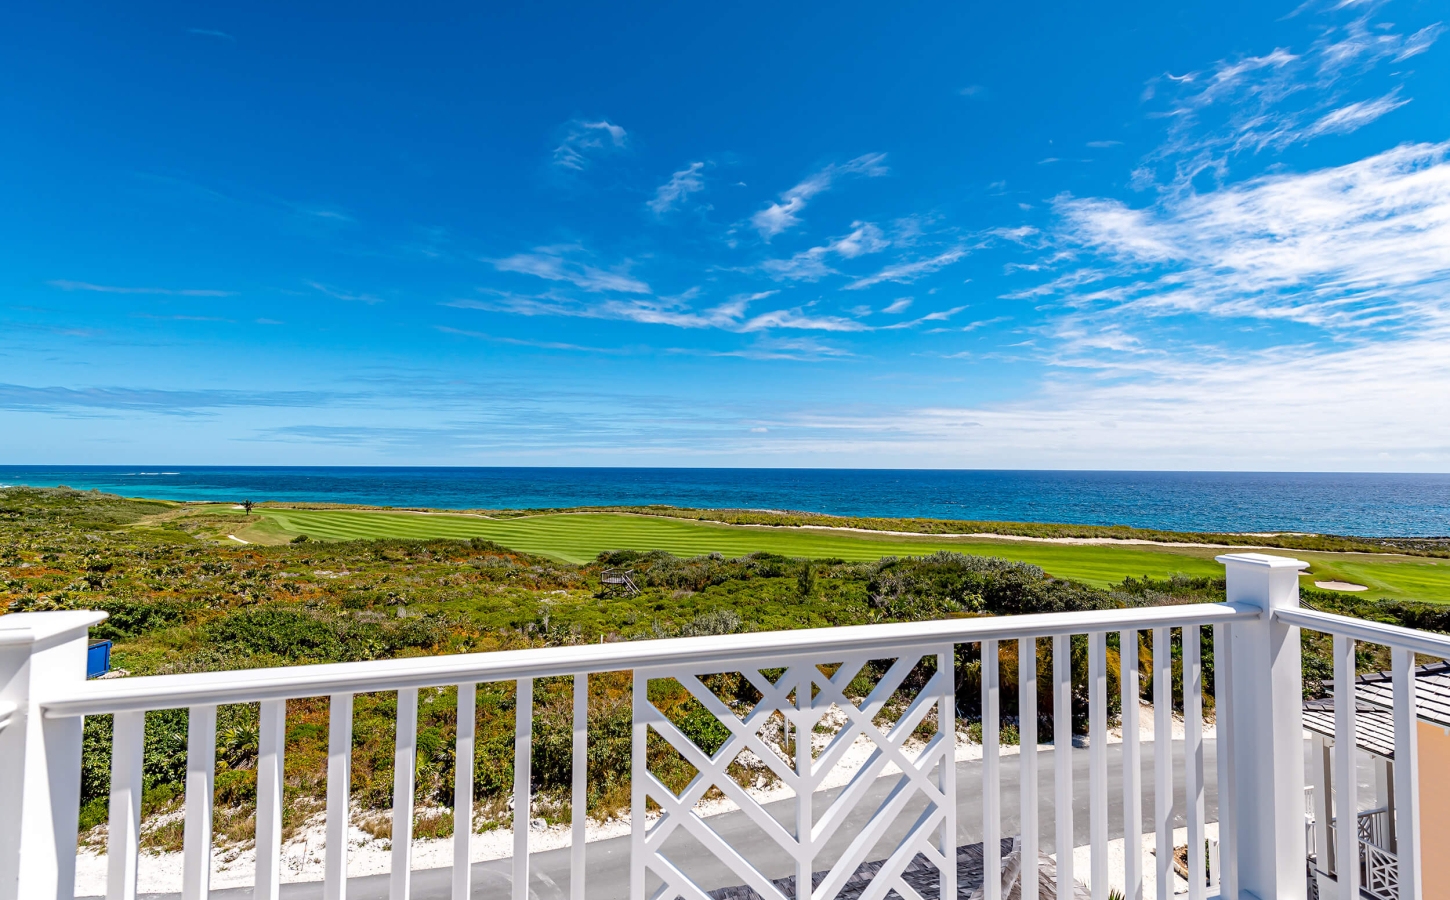 Golf course at The Abaco Club with ocean views, symbolizing the luxury of club lifestyle and coastal living